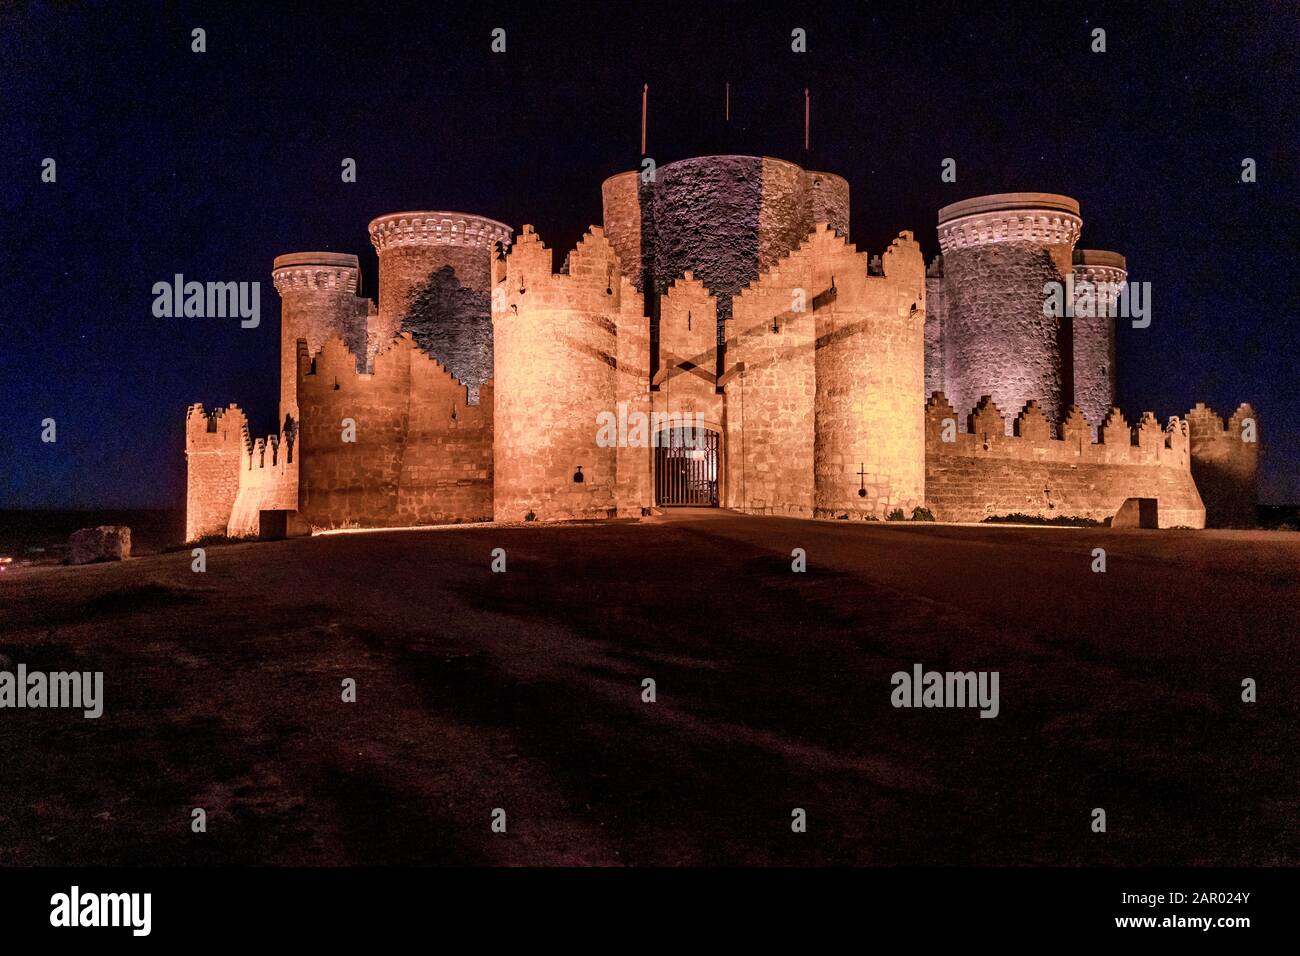 Night view of Belmonte castle in Cuenca province Spain with long stretching city walls topped with battlements Stock Photo